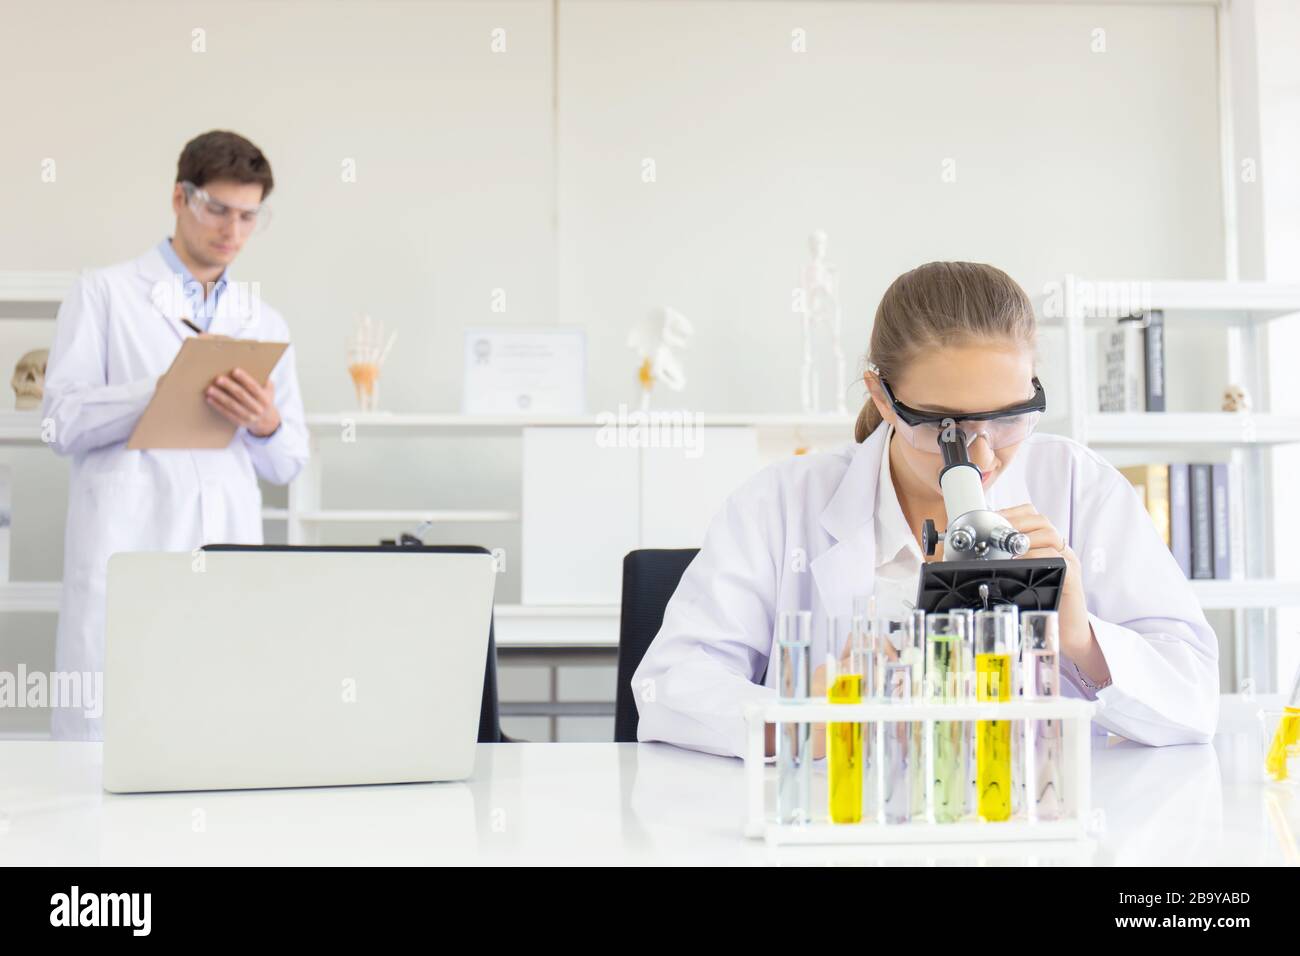 concept of a healthcare researcher, a researcher working in a life science lab, a young research scientist and a male supervisor preparing and analyzi Stock Photo